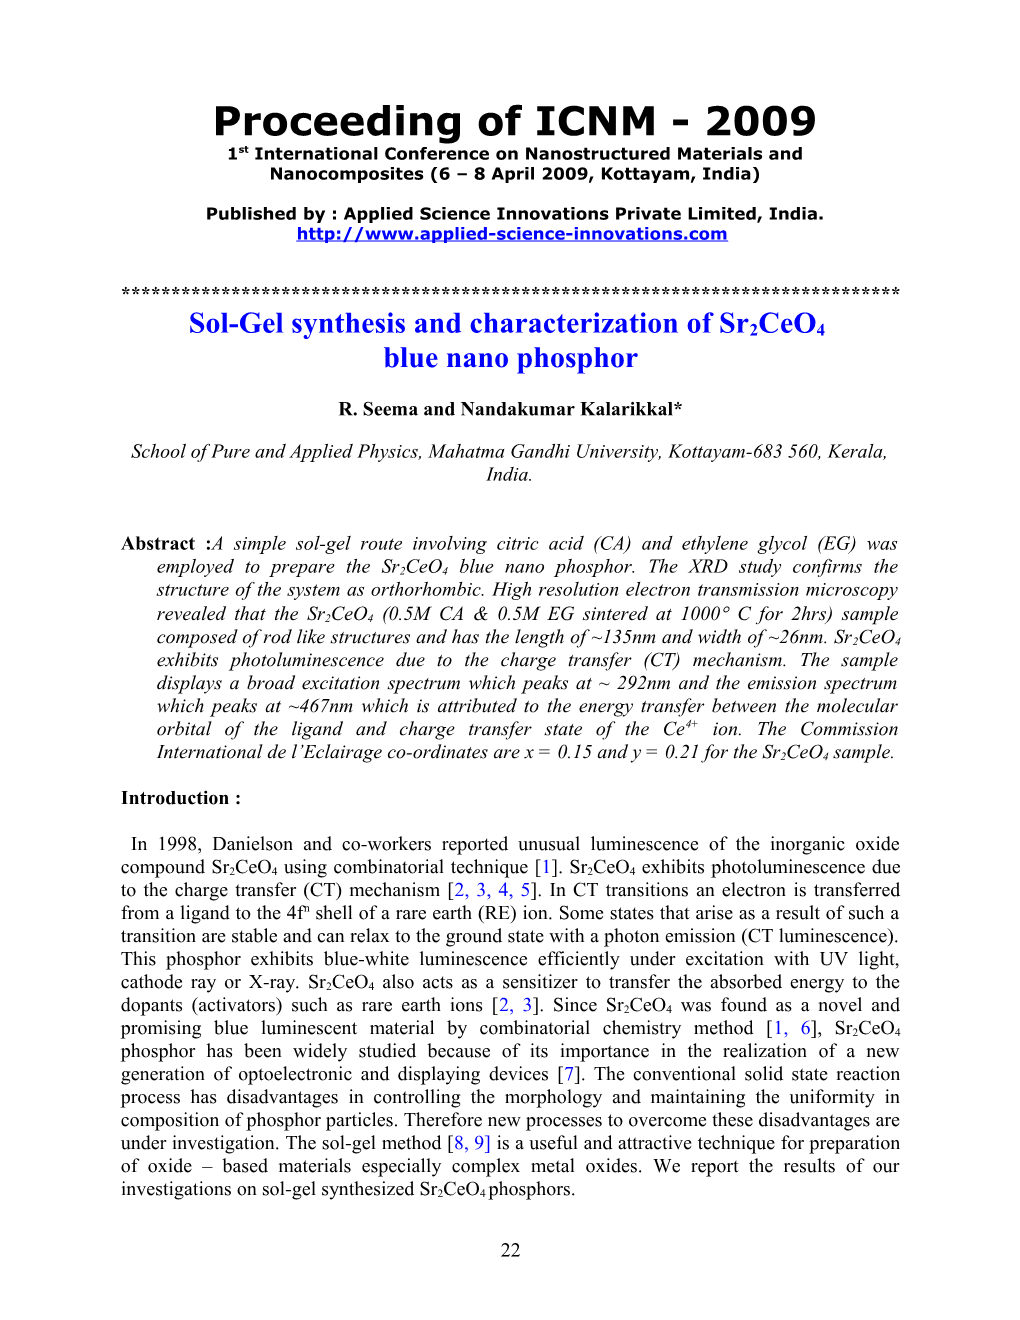 Sol-Gel Synthesis and Characterization of Sr2ceo4 Blue Nano Phosphor